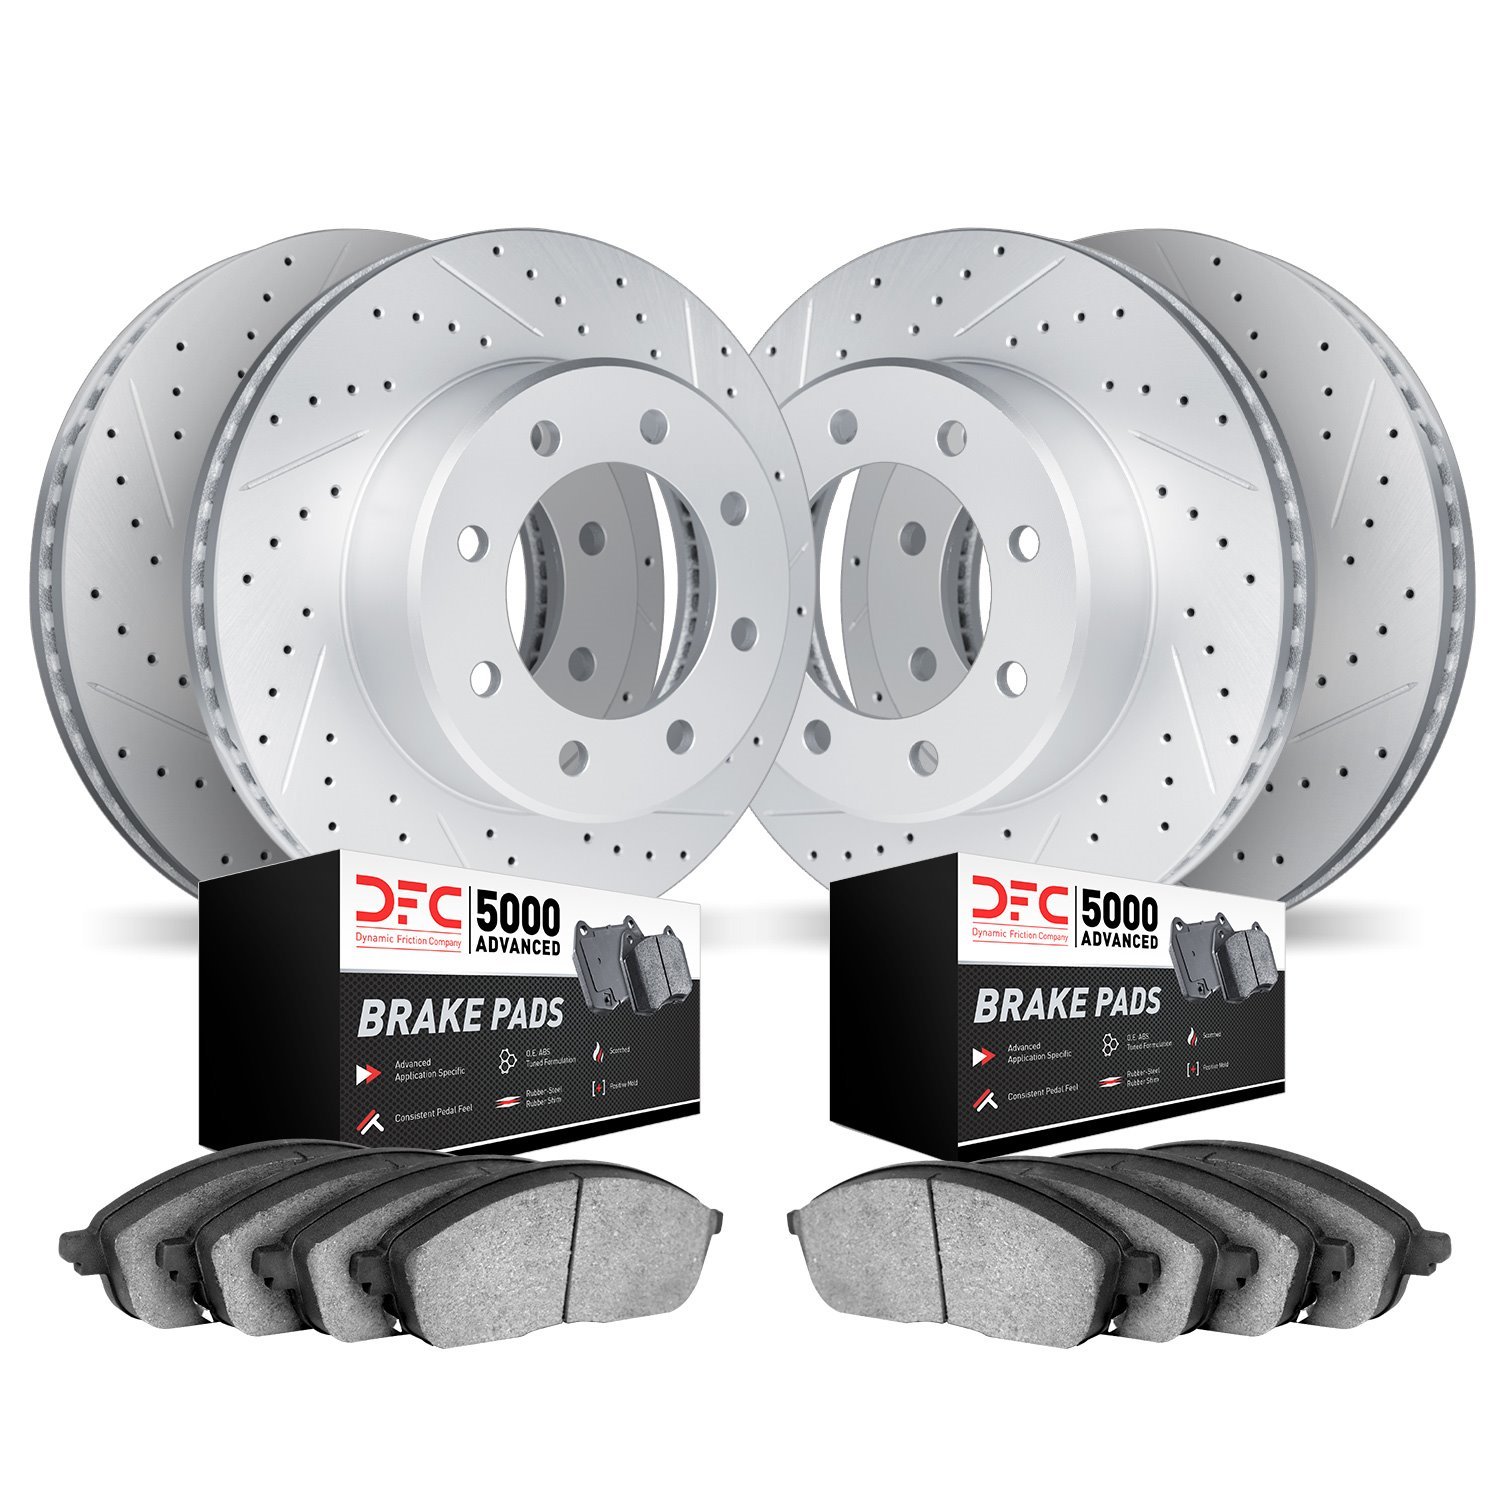 2504-54227 Geoperformance Drilled/Slotted Rotors w/5000 Advanced Brake Pads Kit, 1999-2007 Ford/Lincoln/Mercury/Mazda, Position: